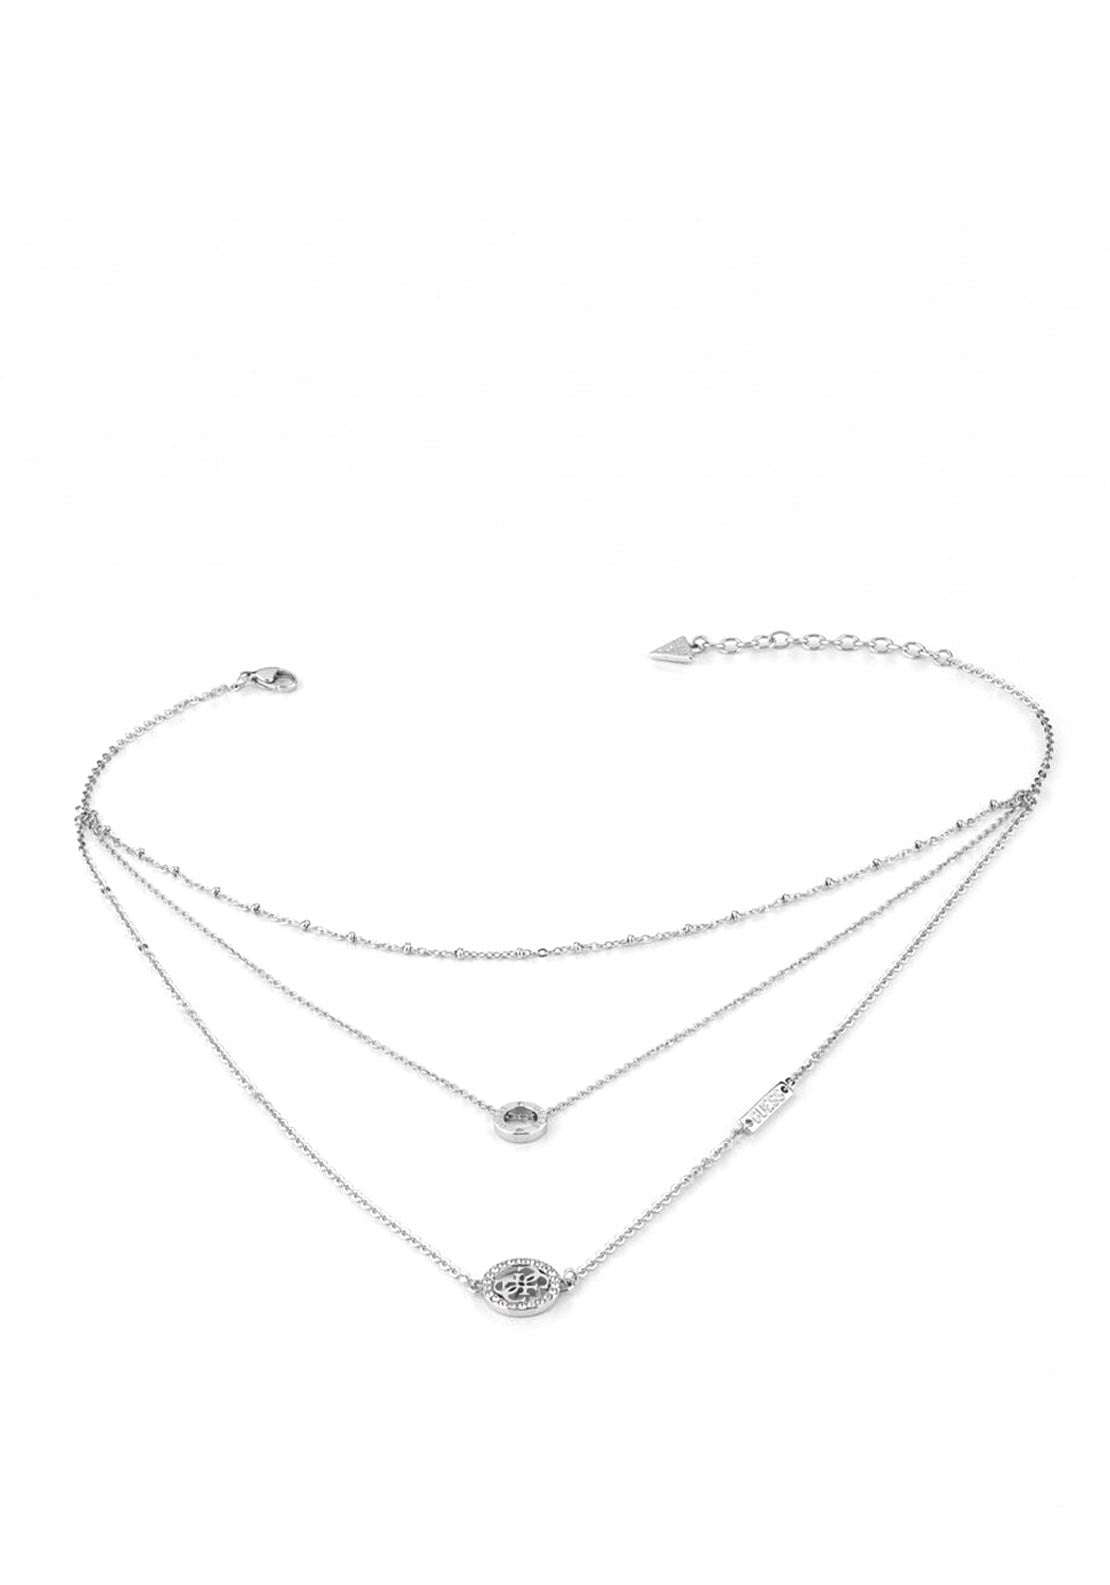 Guess 'Equilibre' Layered Necklace, Silver - McElhinneys